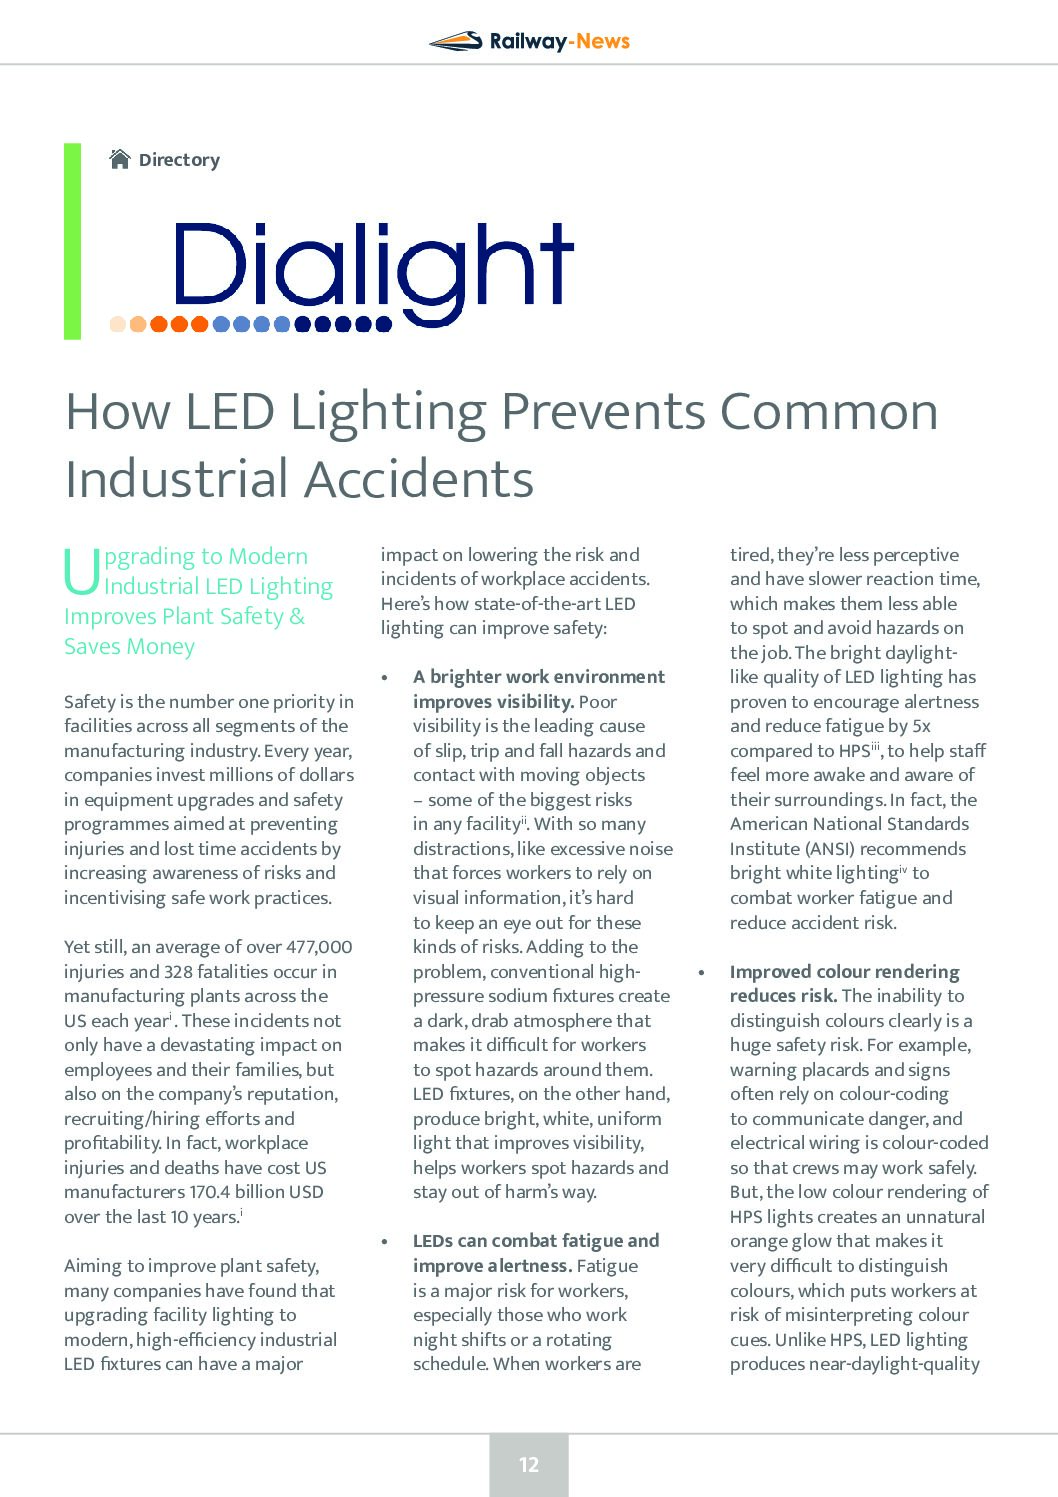 How LED Lighting Prevents Common Industrial Accidents